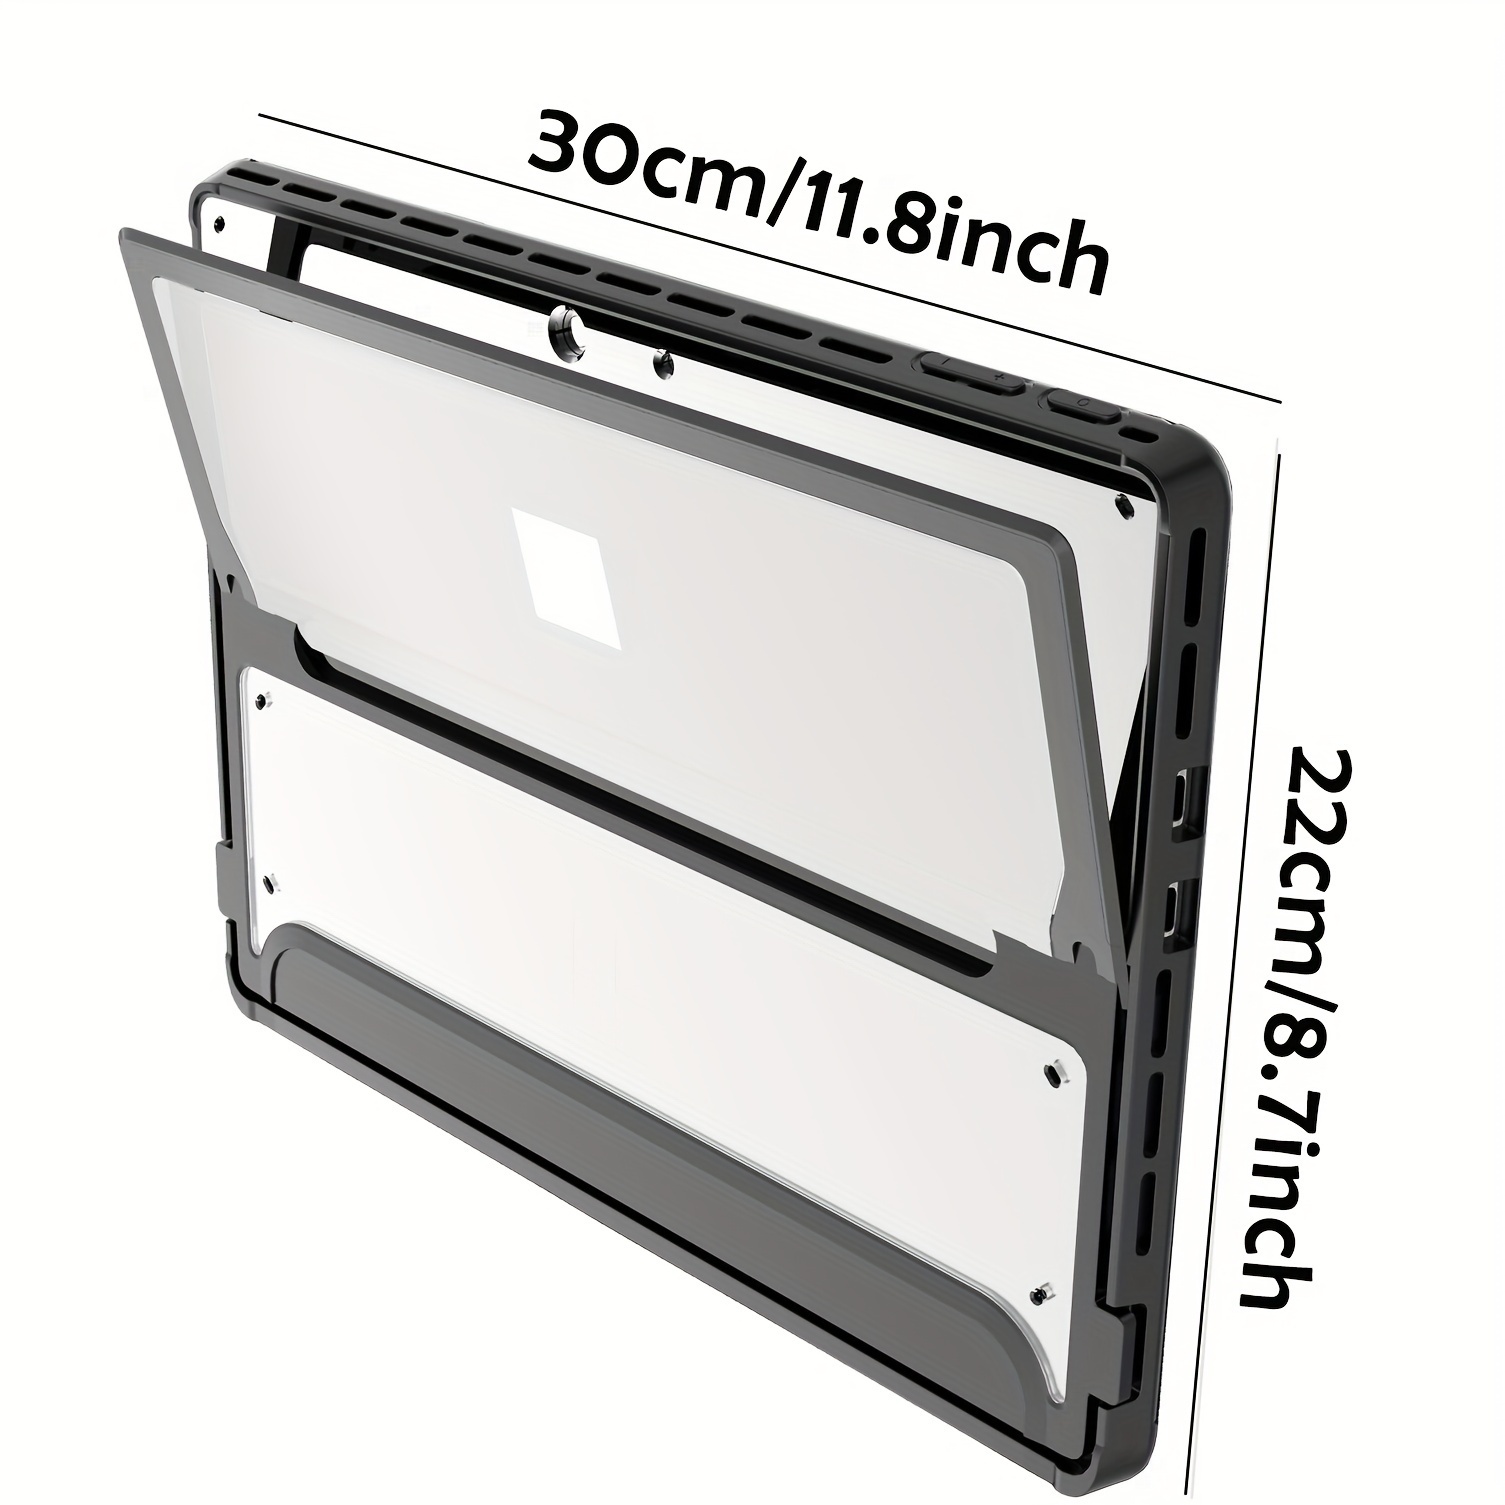 For Microsoft Surface Pro 9 8 7 6 5 4 7+ Protective Case - Temu